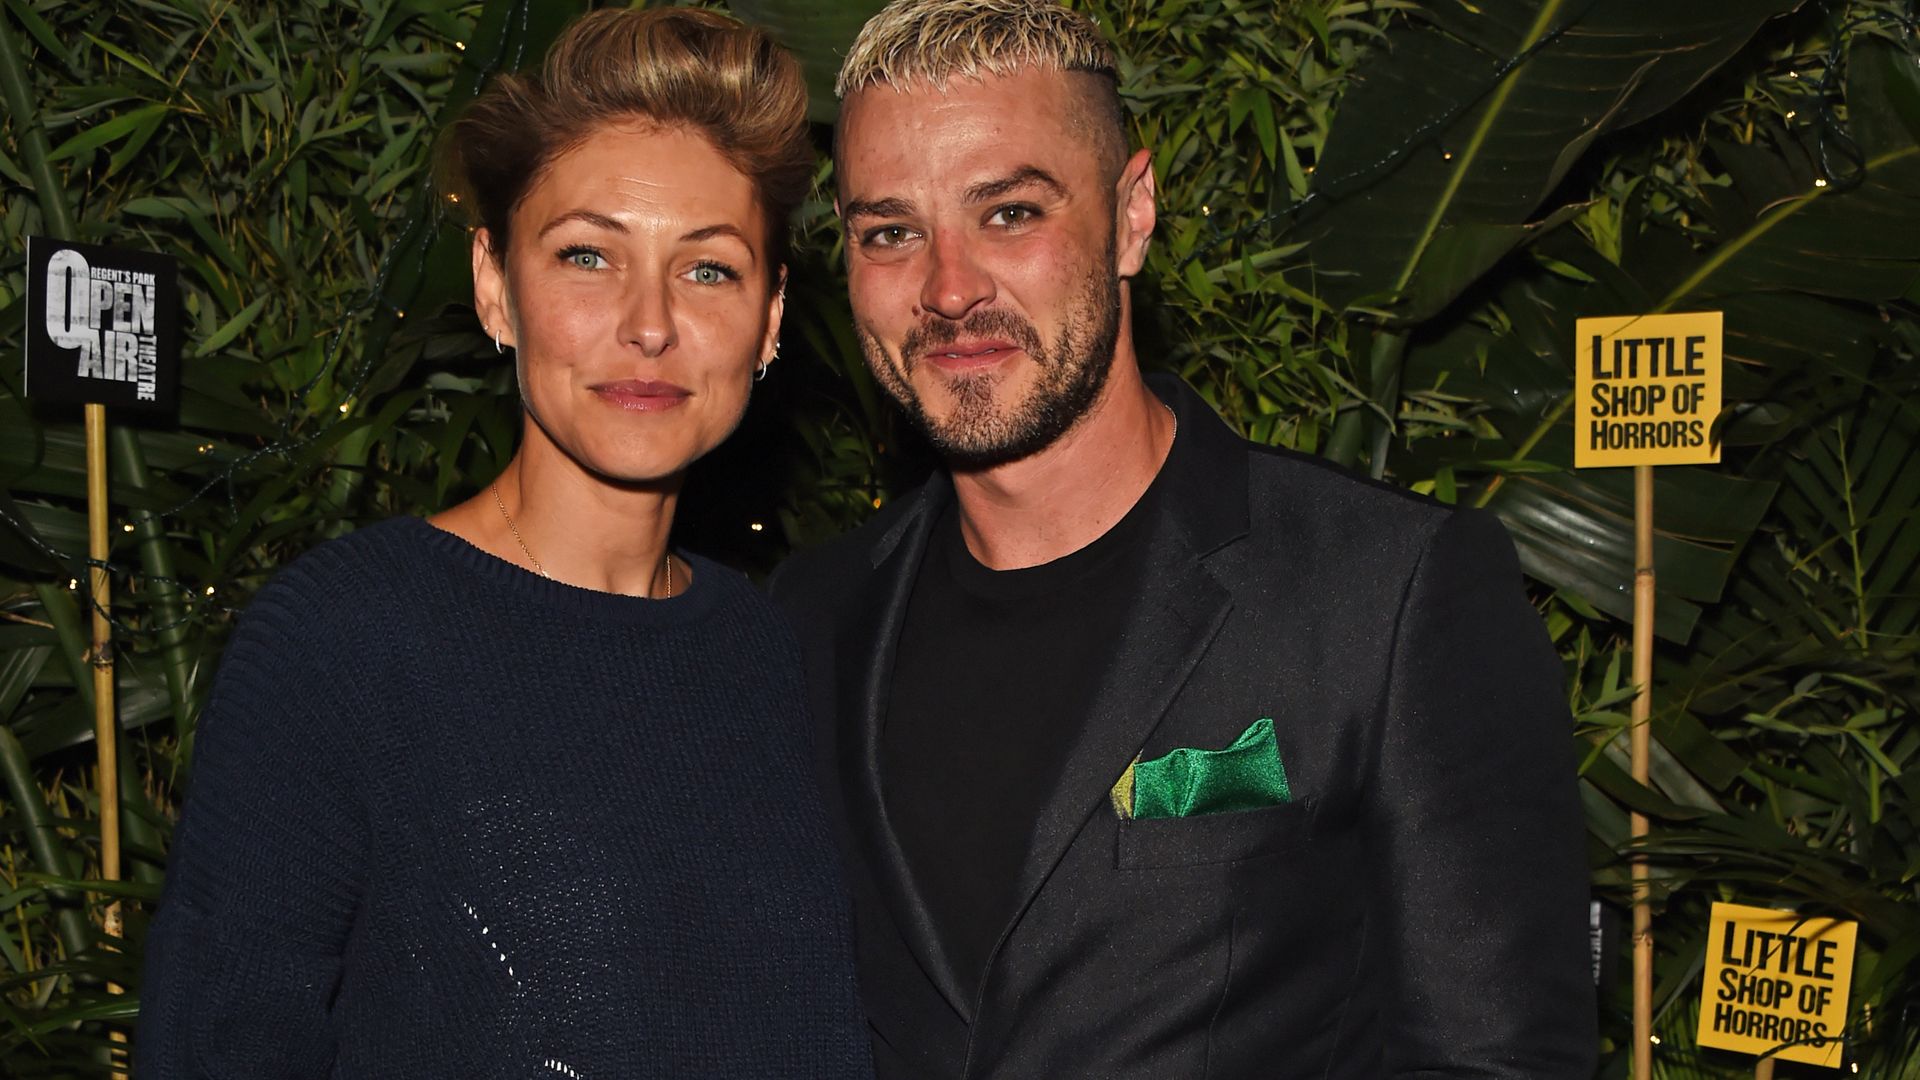 Emma Willis and Matt Willis attend the press night after party for Little Shop Of Horrors